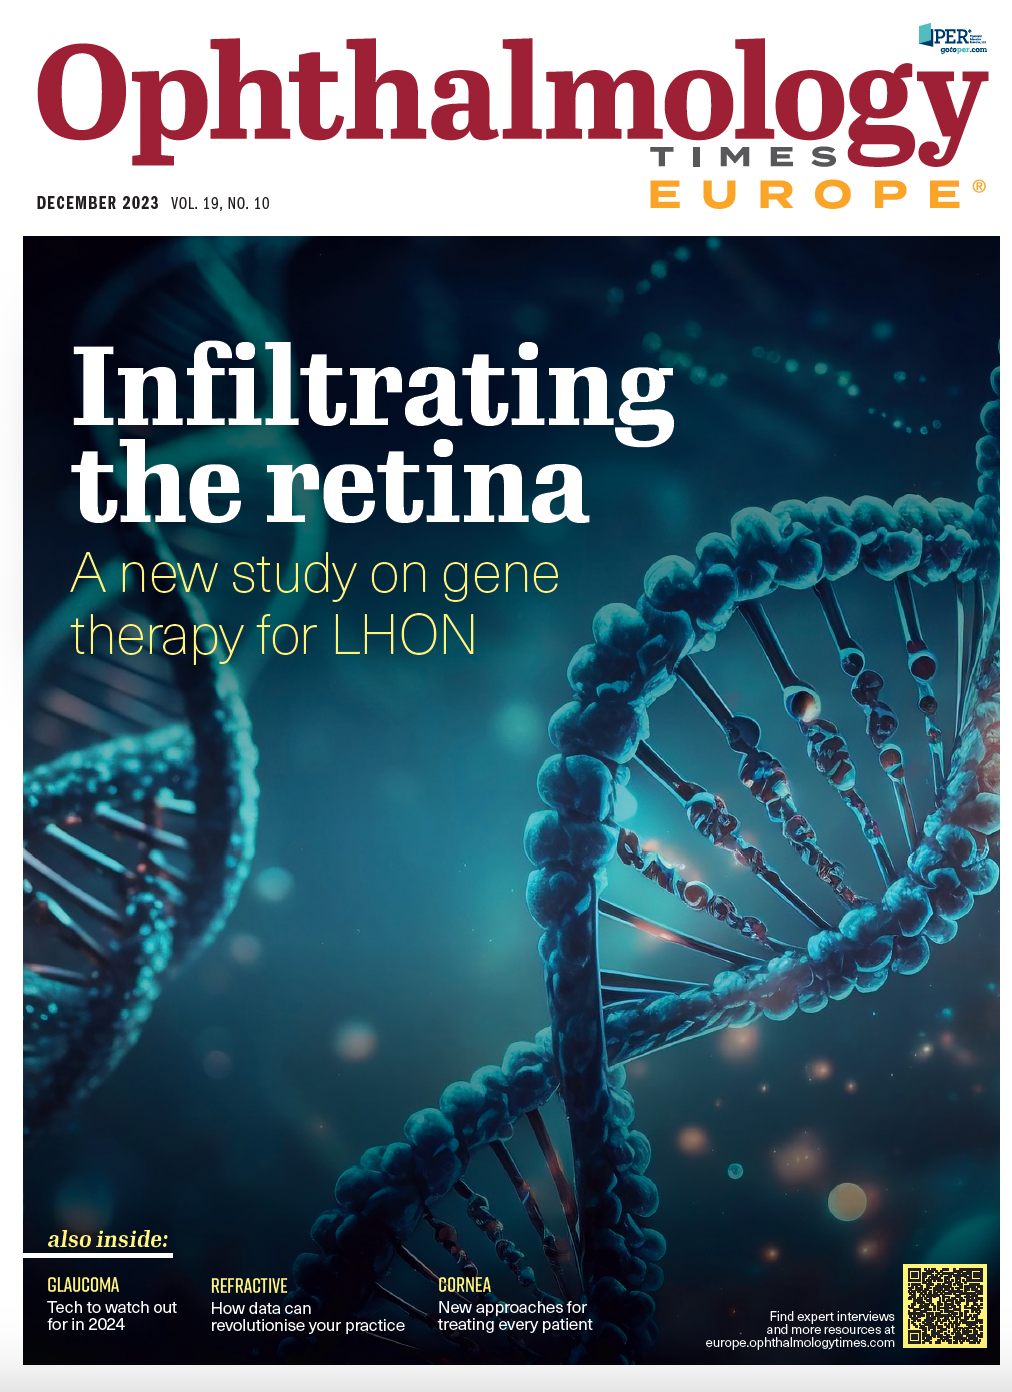 The cover of Ophthalmology Times Europe December 2023, which shows a strand of double-helix DNA and the caption "Infiltrating the retina: a new study on gene therapy for LHON"